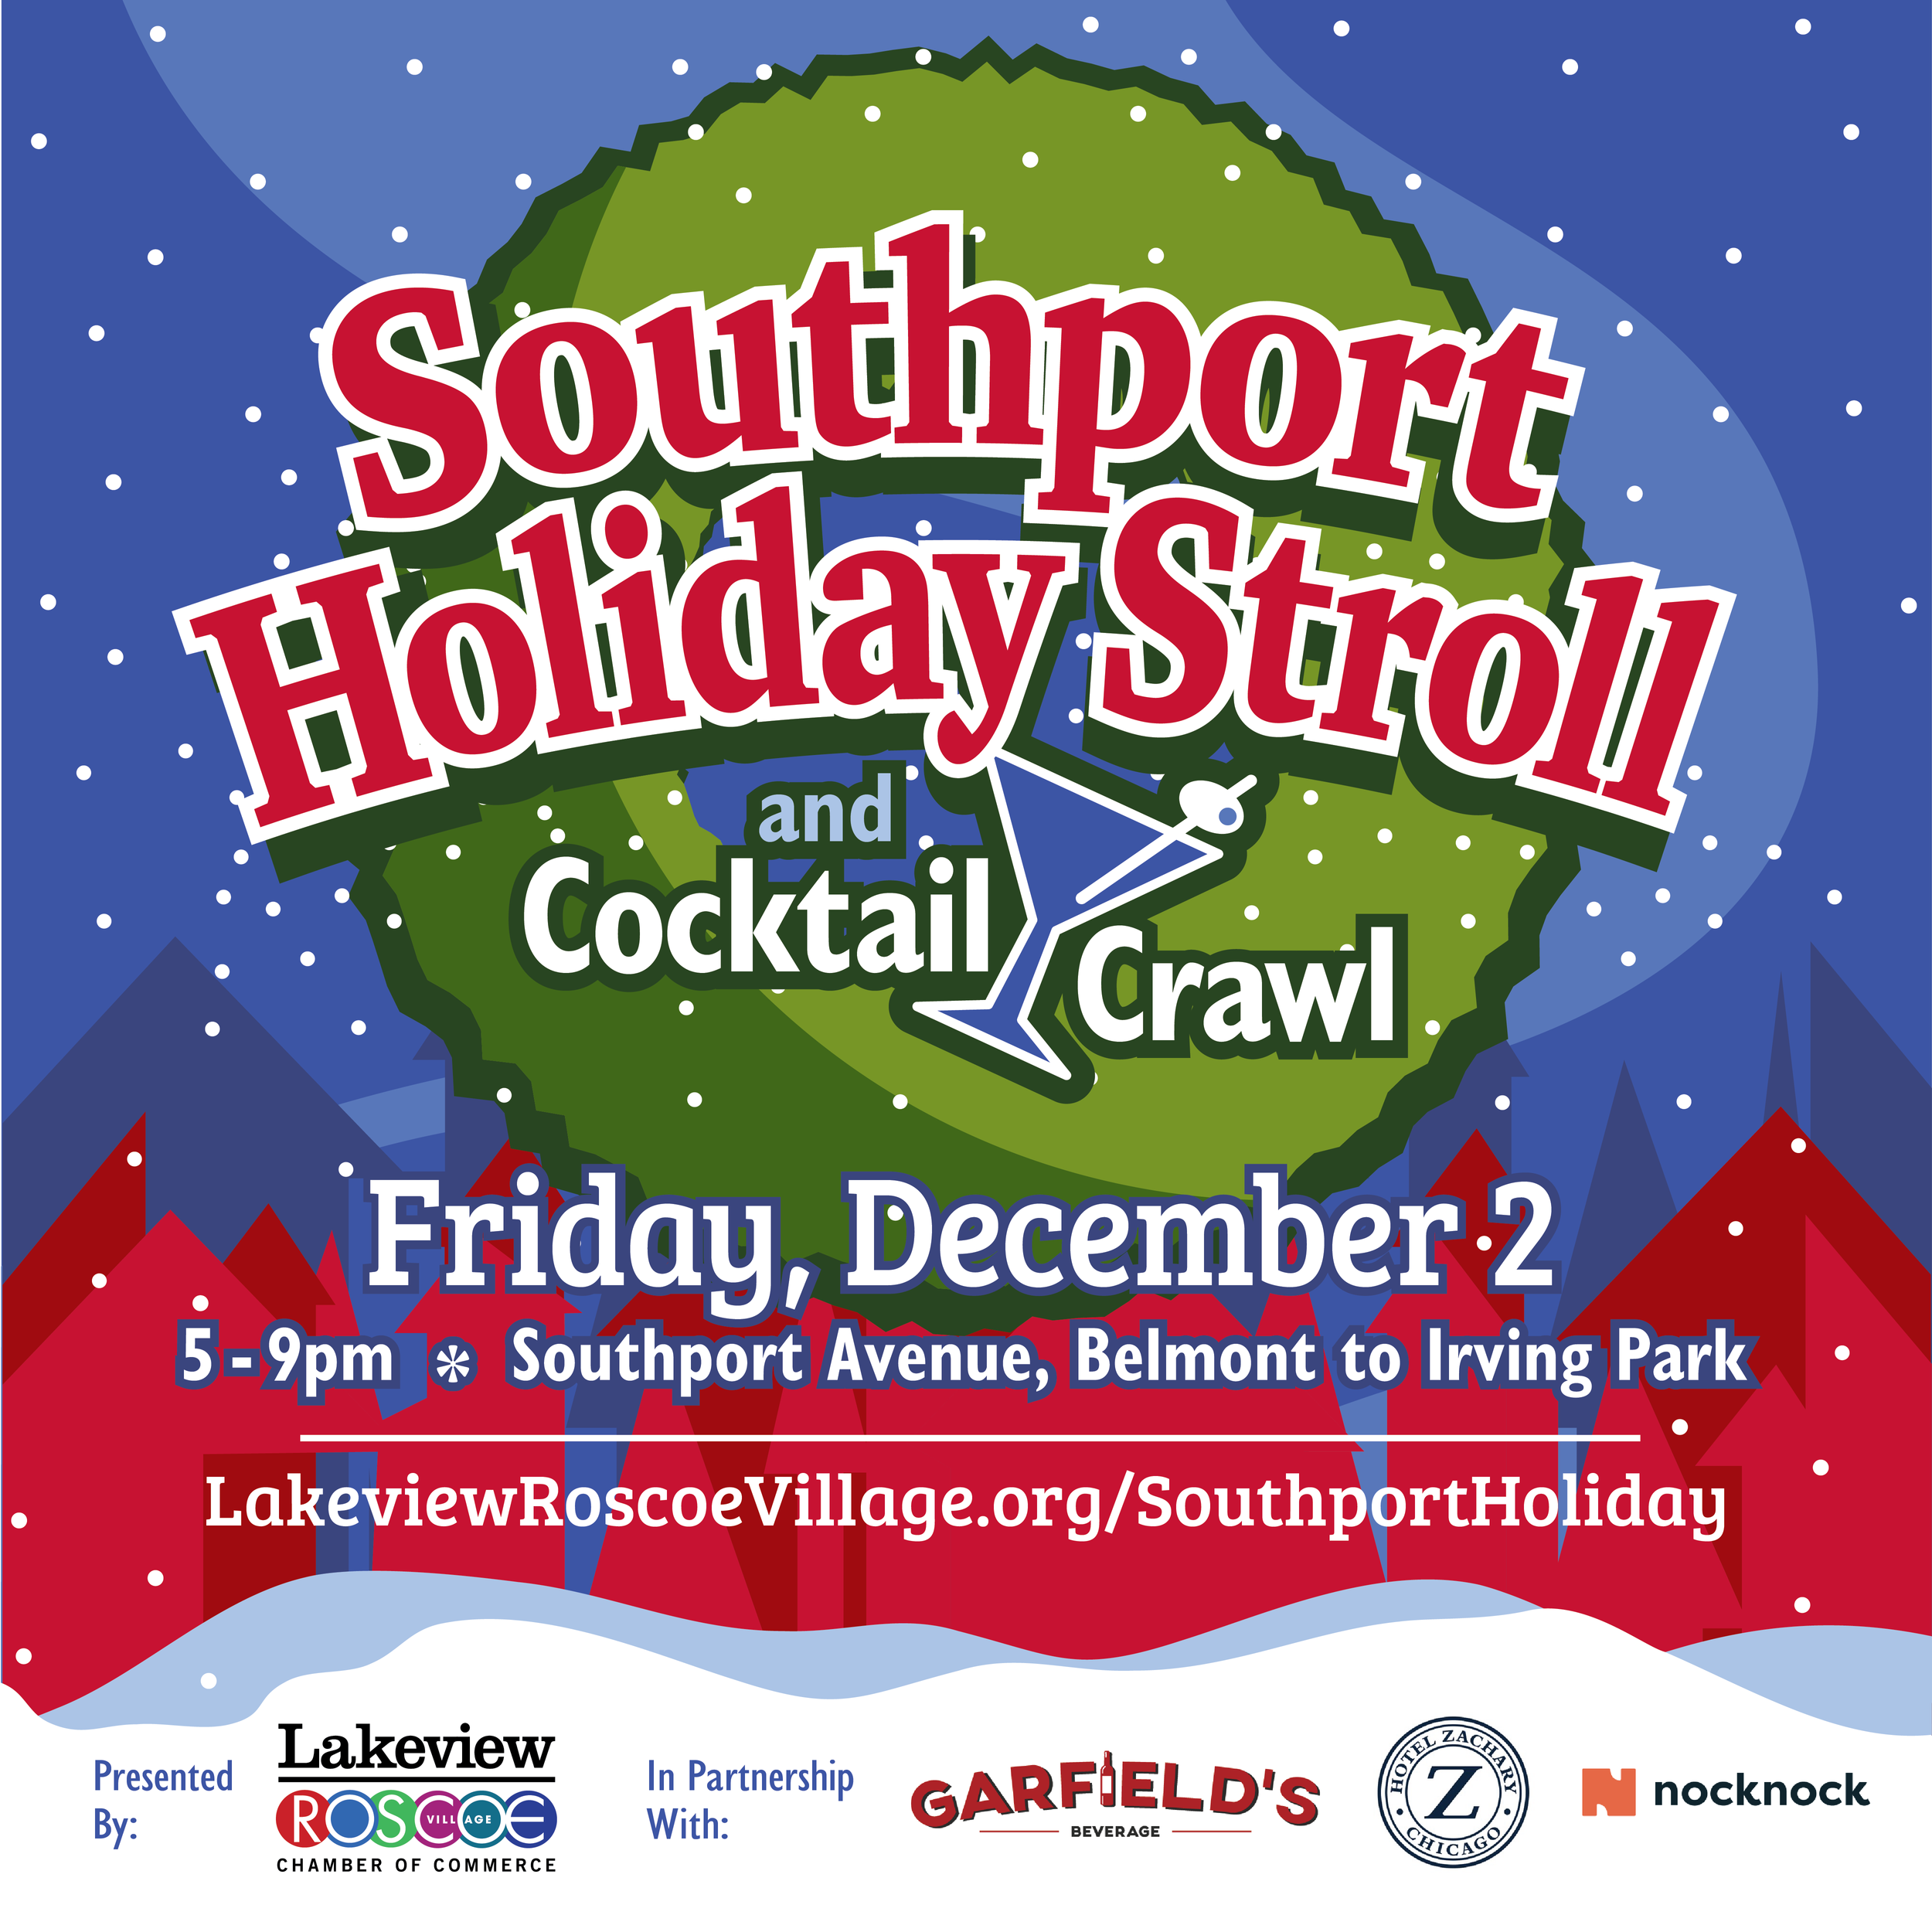 SOUTHPORT HOLIDAY STROLL &amp; COCKTAIL CRAWL: Low Tickets &amp; Photos with Santa